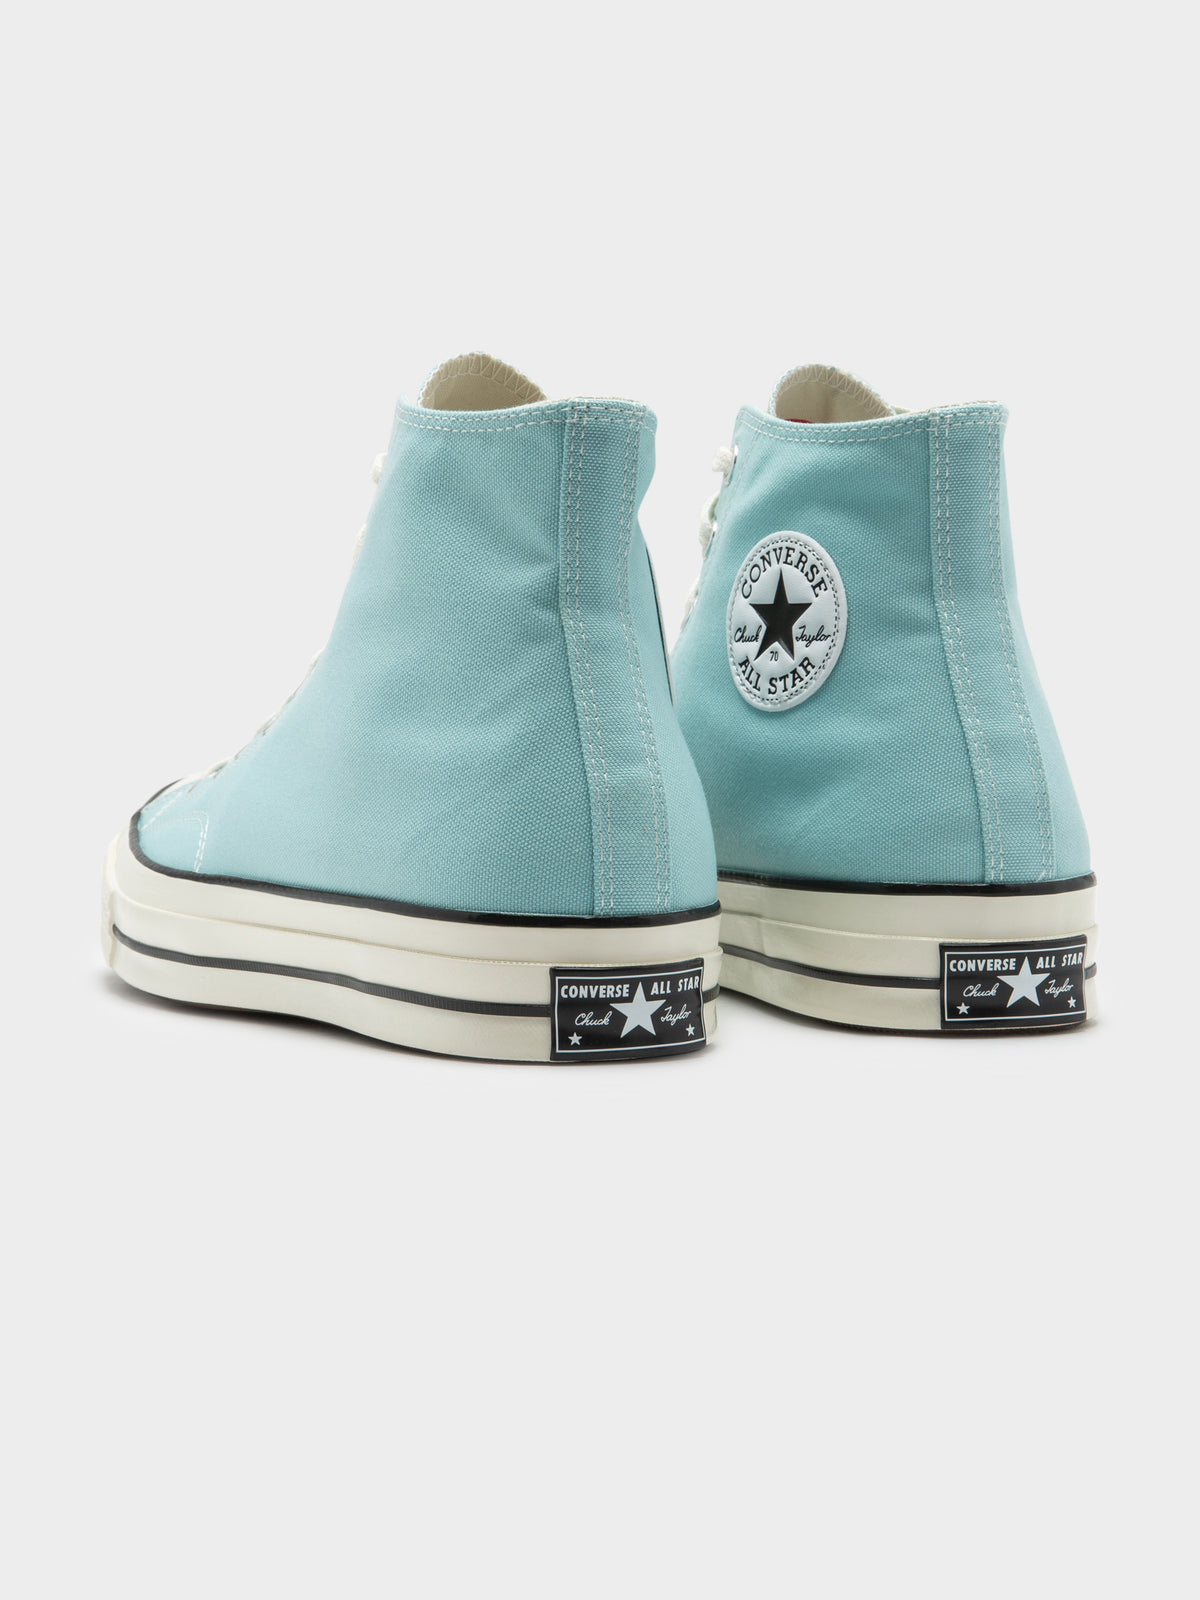 Unisex Chuck Taylor No Waste Canvas in Light Green